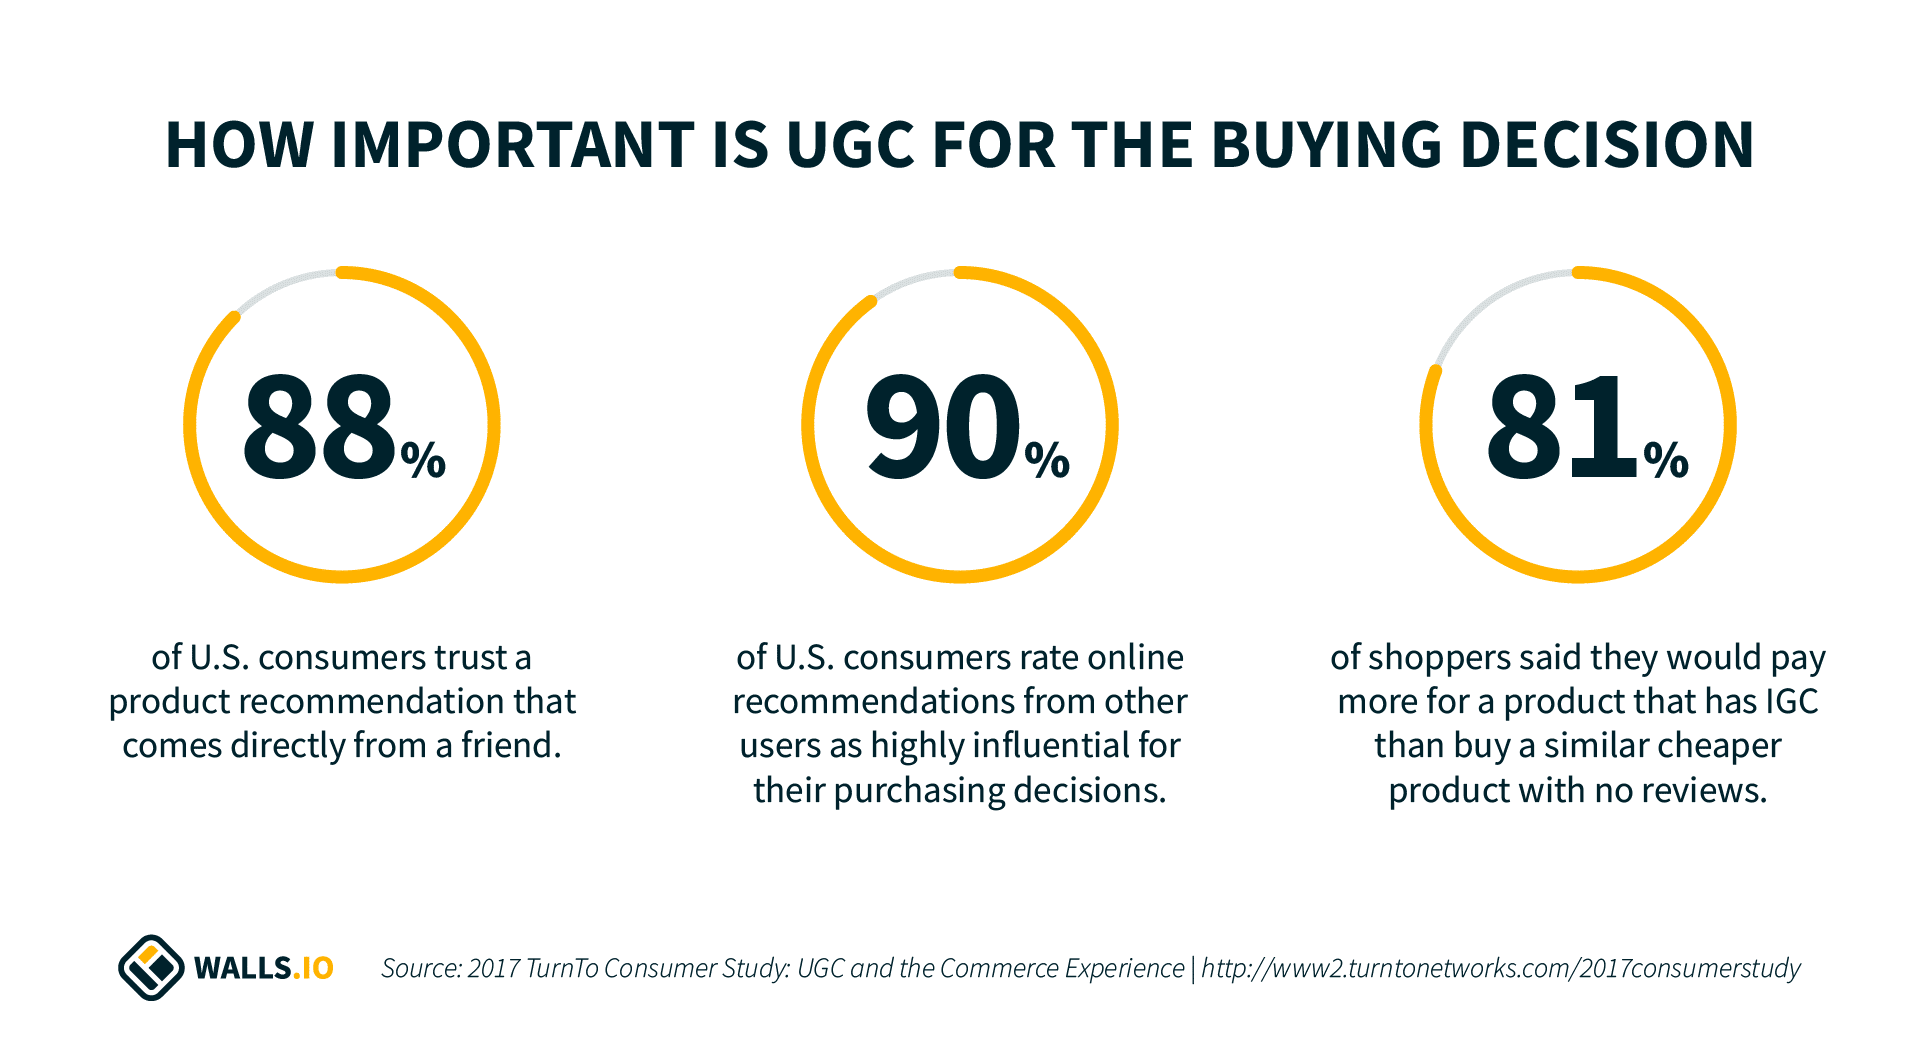 This graph shows why user-generated content is important for buyer decisions